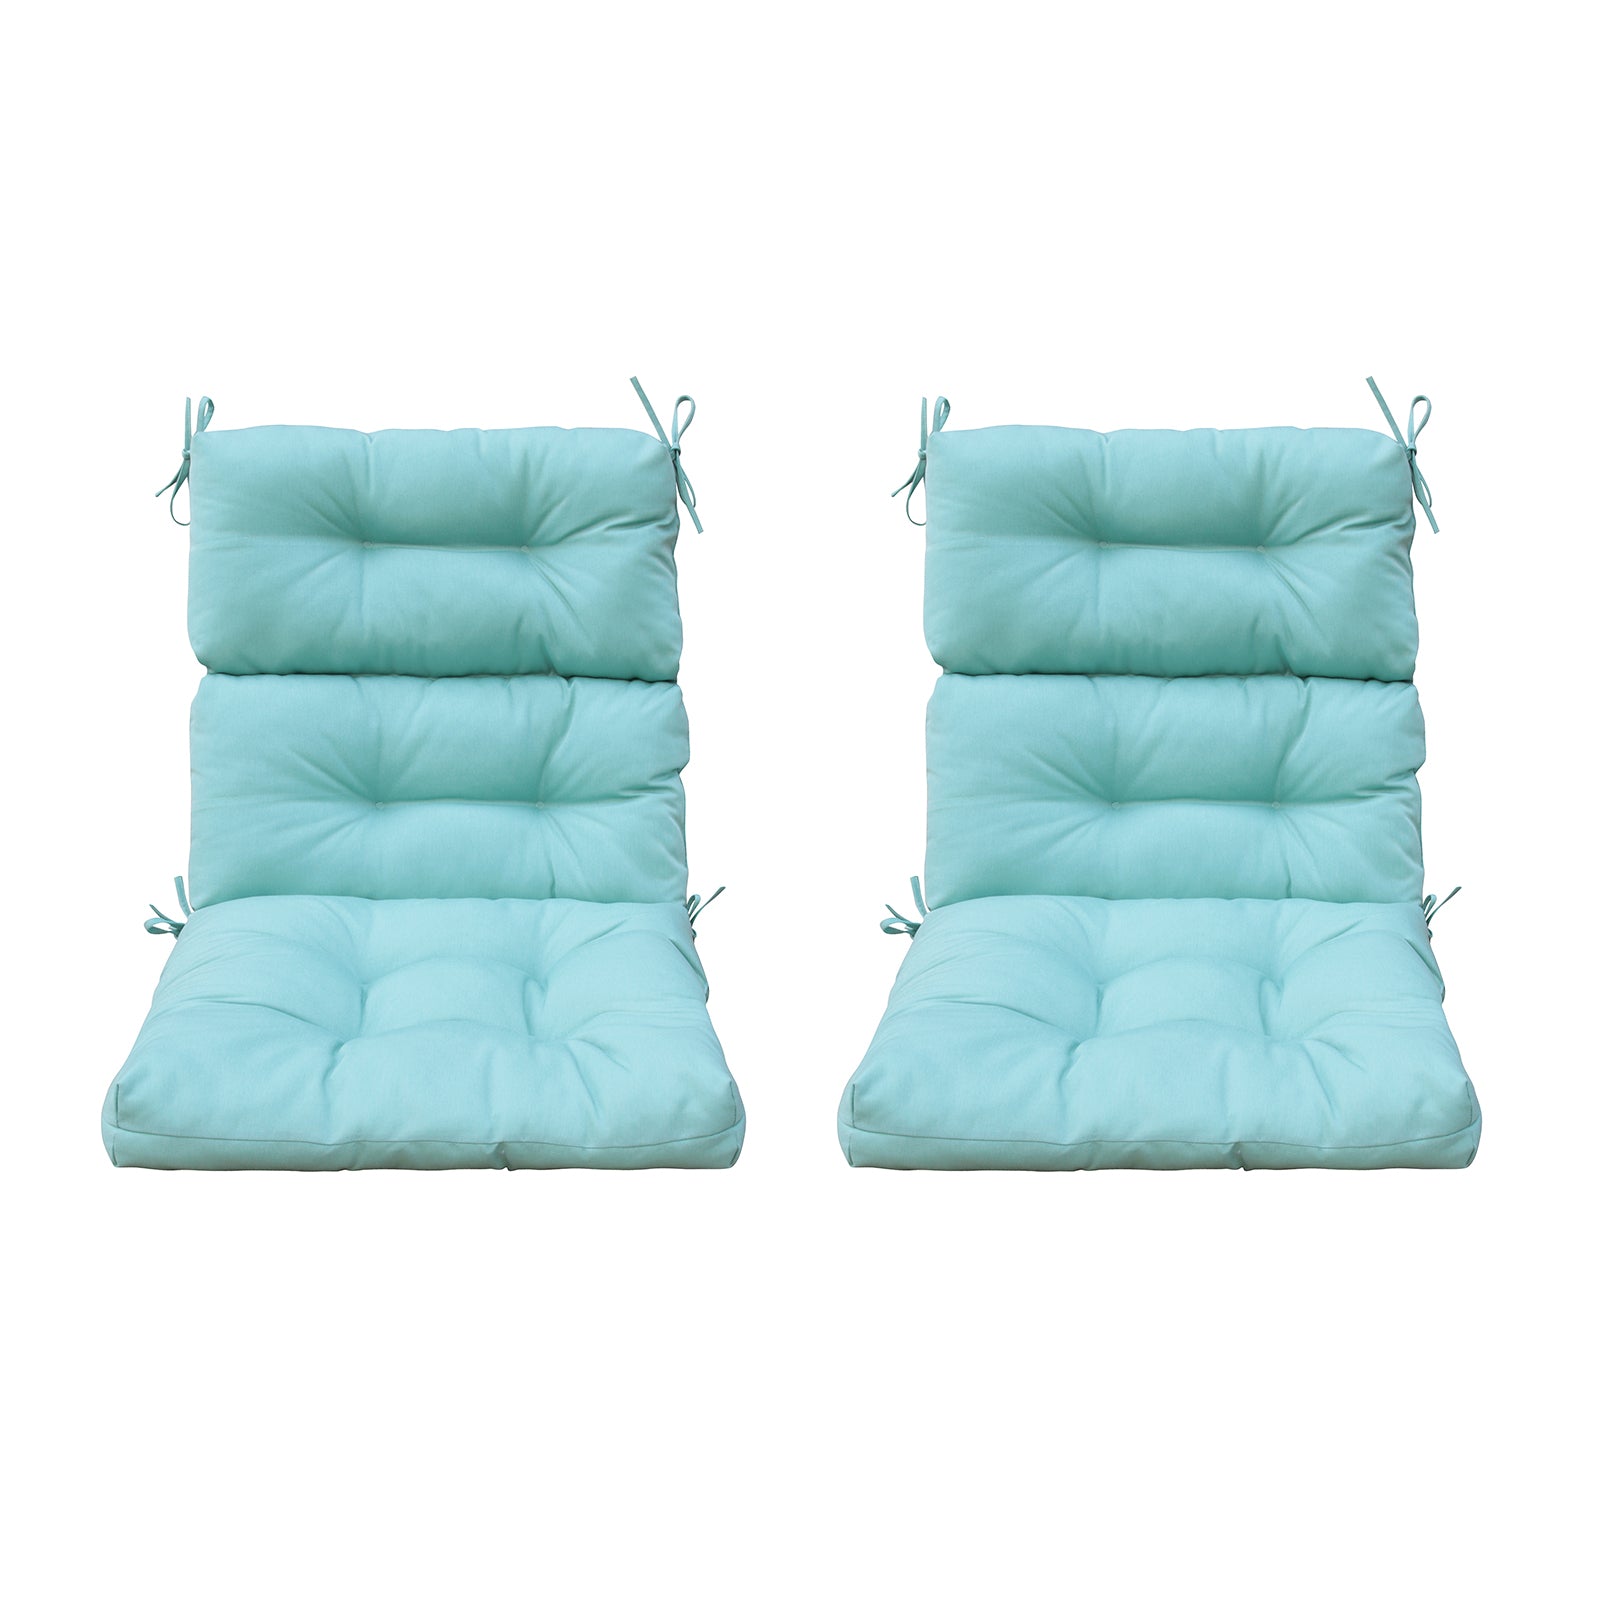 Outdoor Patio High Back Chair Cushions Tufted Square Corner Olefin Light Blue Set of 2